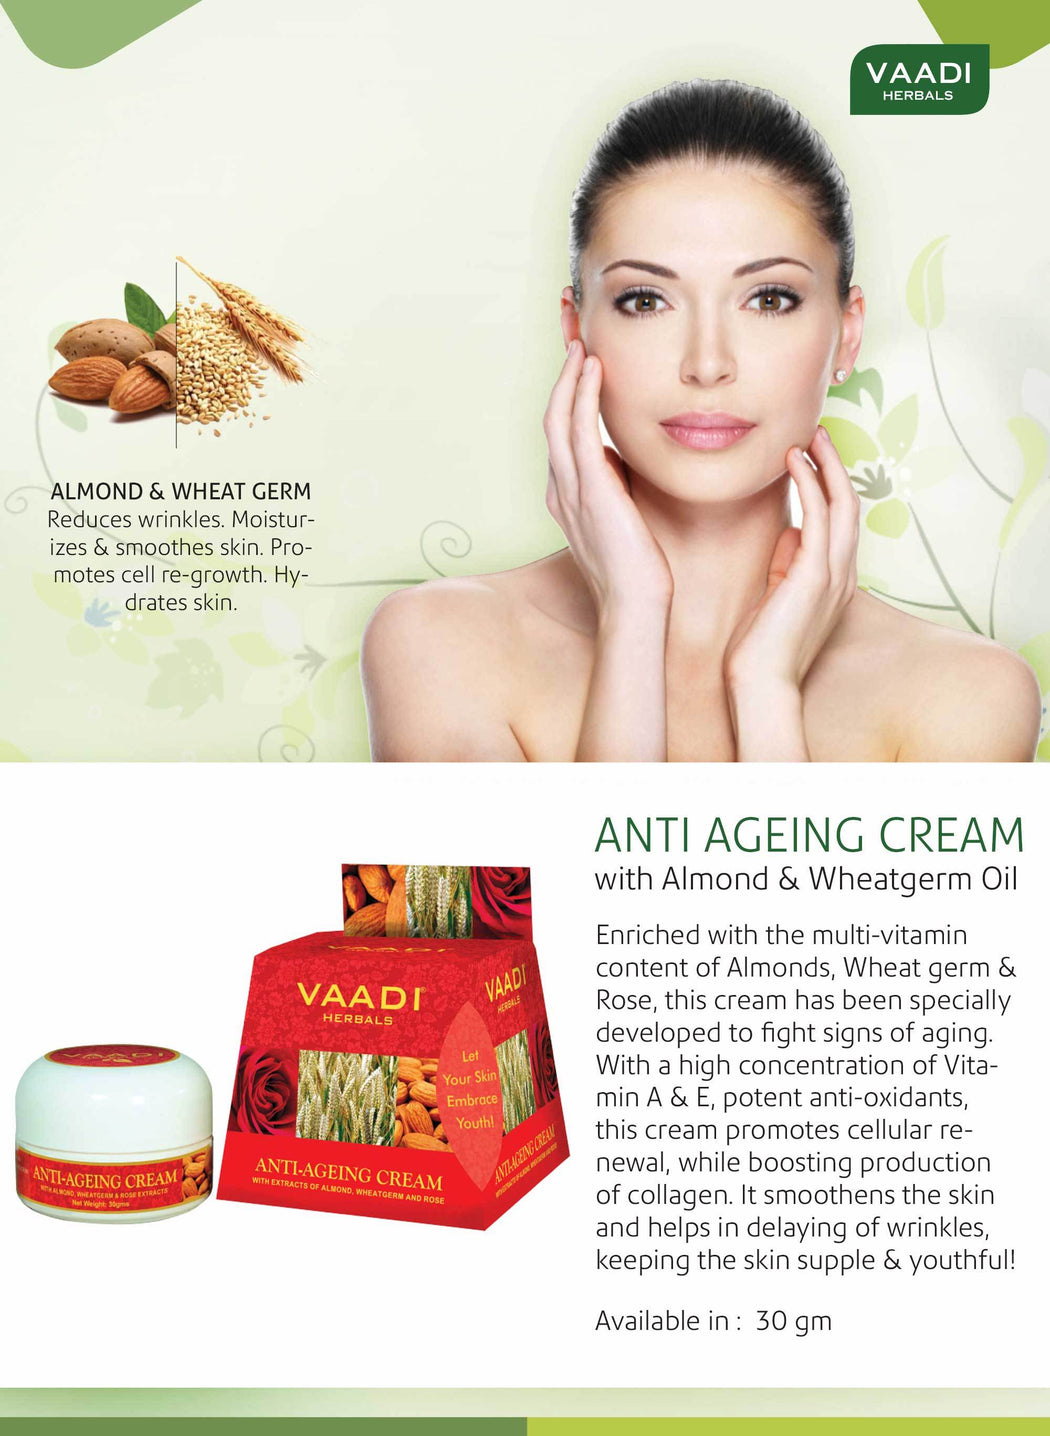 Organic Anti Ageing Cream with Almond, Wheatgerm - Boosts Collagen & Delays Wrinkles - Keeps Skin Soft & Youthful ( 30 gms / 1.1 oz)